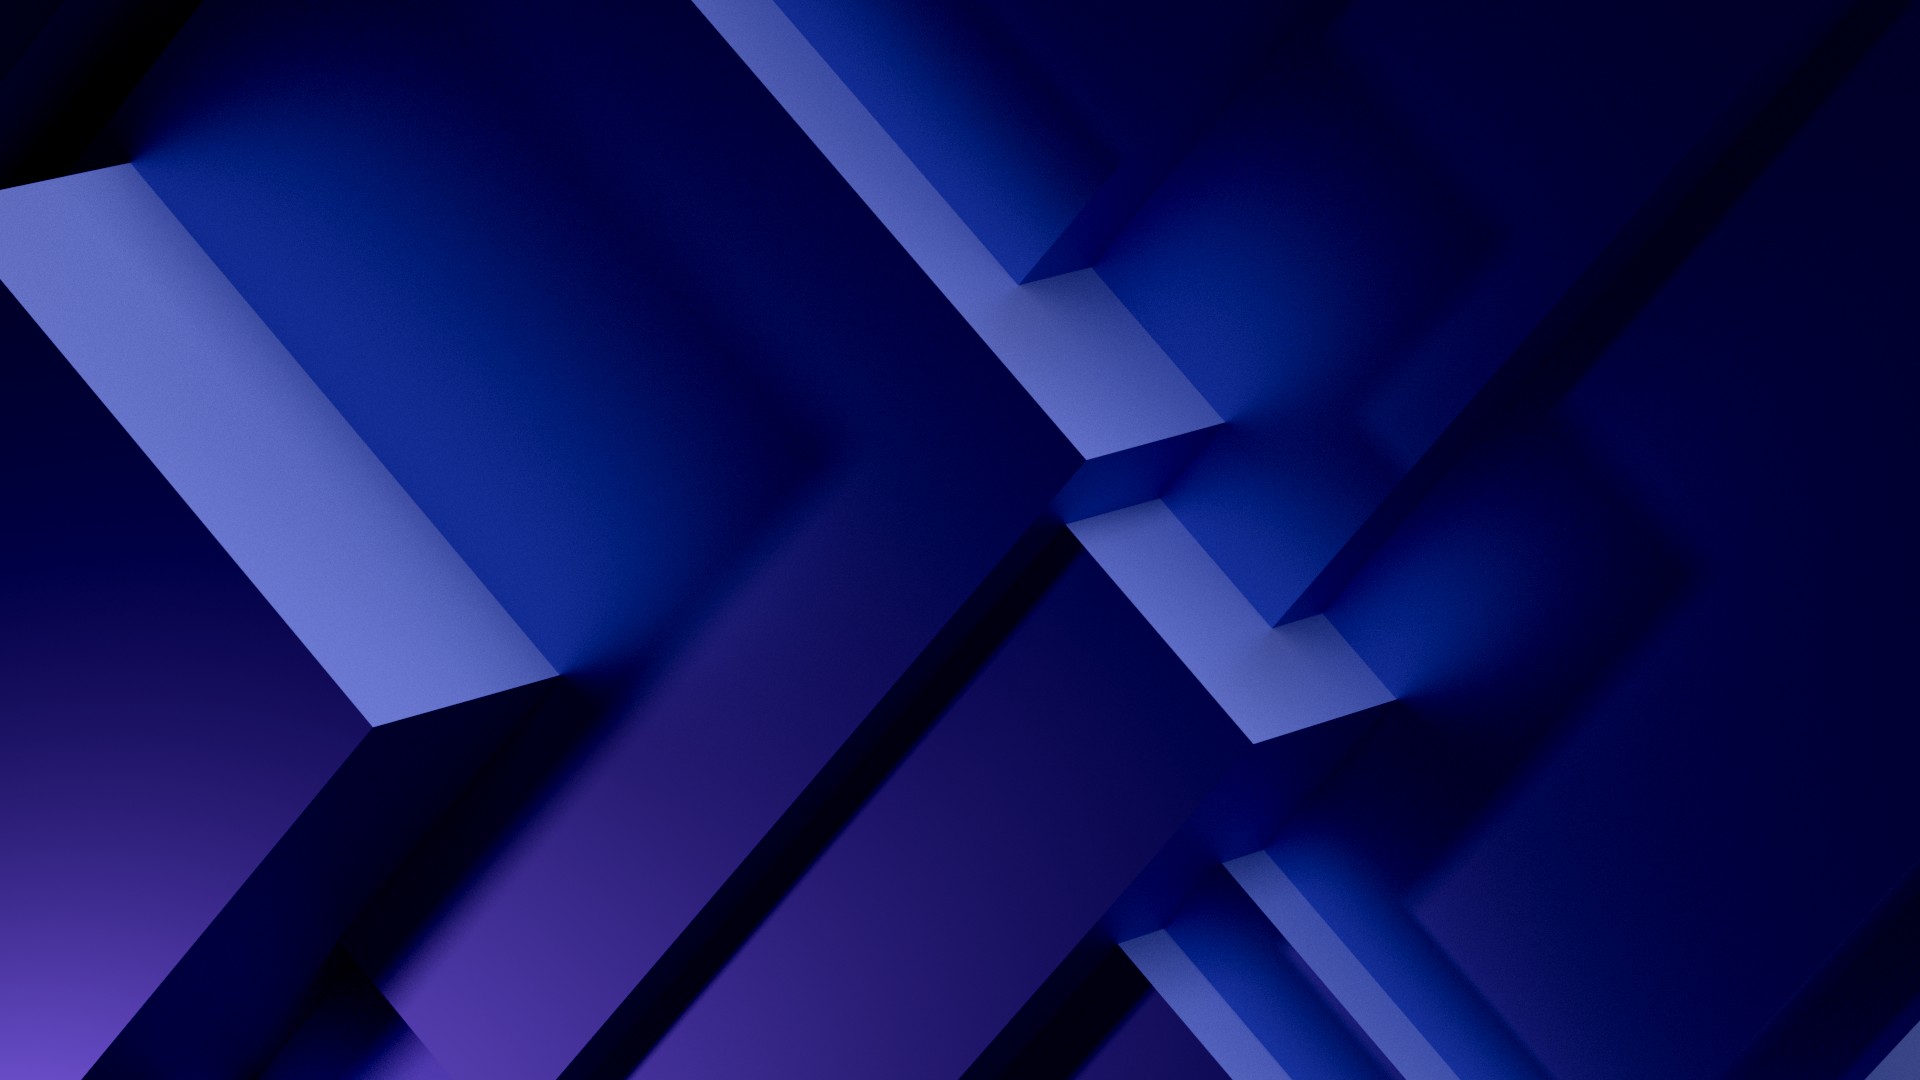 modern, Blender, Geometry, Square, Abstract, Cube, Blue, Purple, CGI  Wallpapers HD / Desktop and Mobile Backgrounds